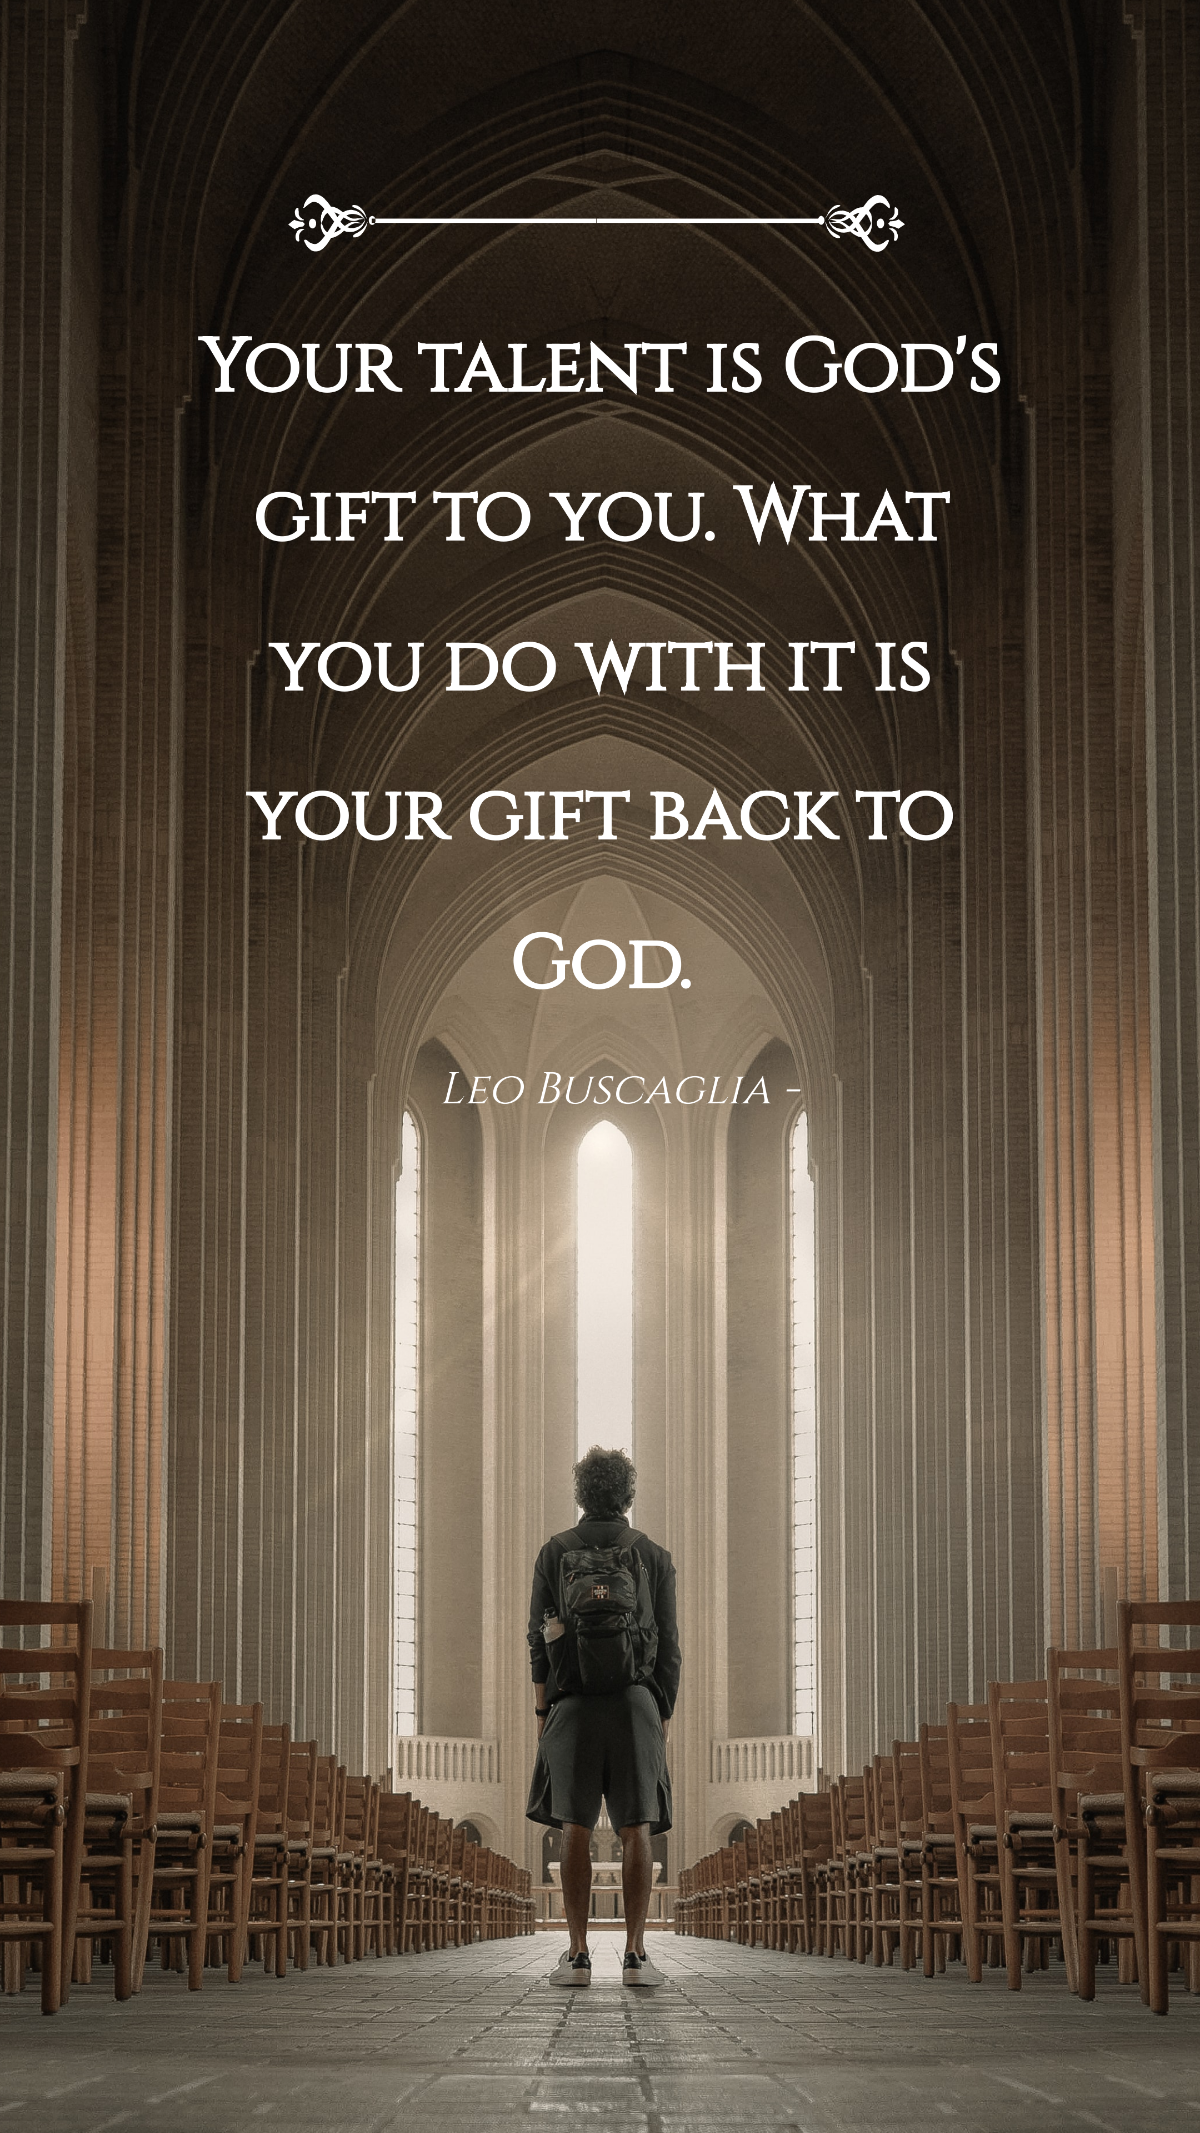 Leo Buscaglia - Your talent is God's gift to you. What you do with it is your gift back to God. Template